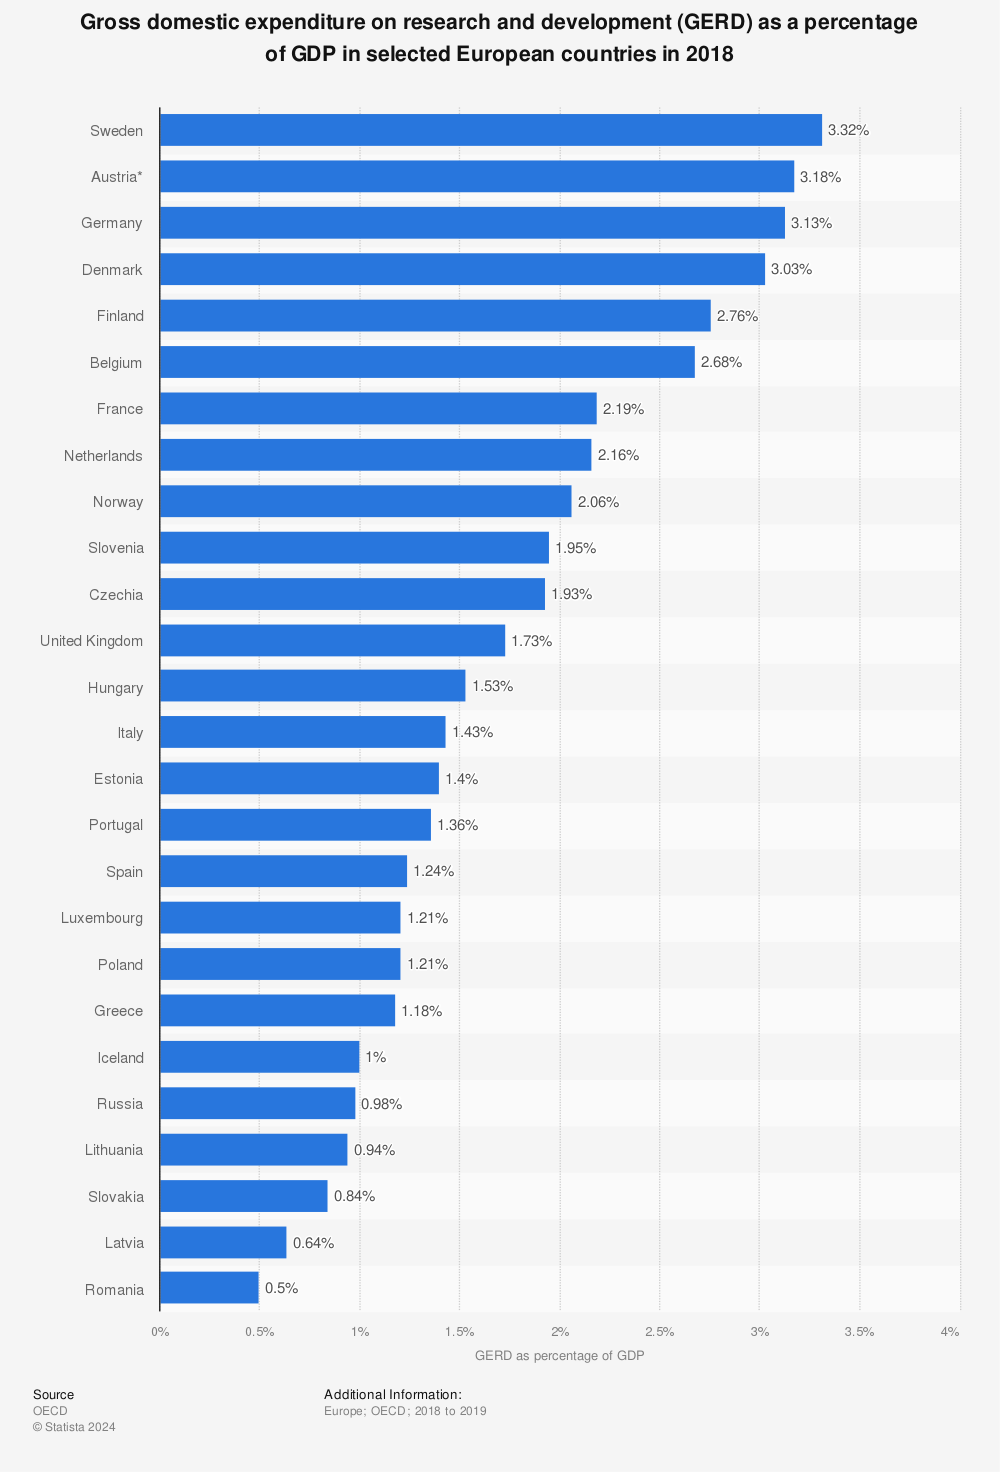 Statistic: Gross domestic expenditure on research and development (GERD) as a percentage of GDP in selected European countries in 2018 | Statista